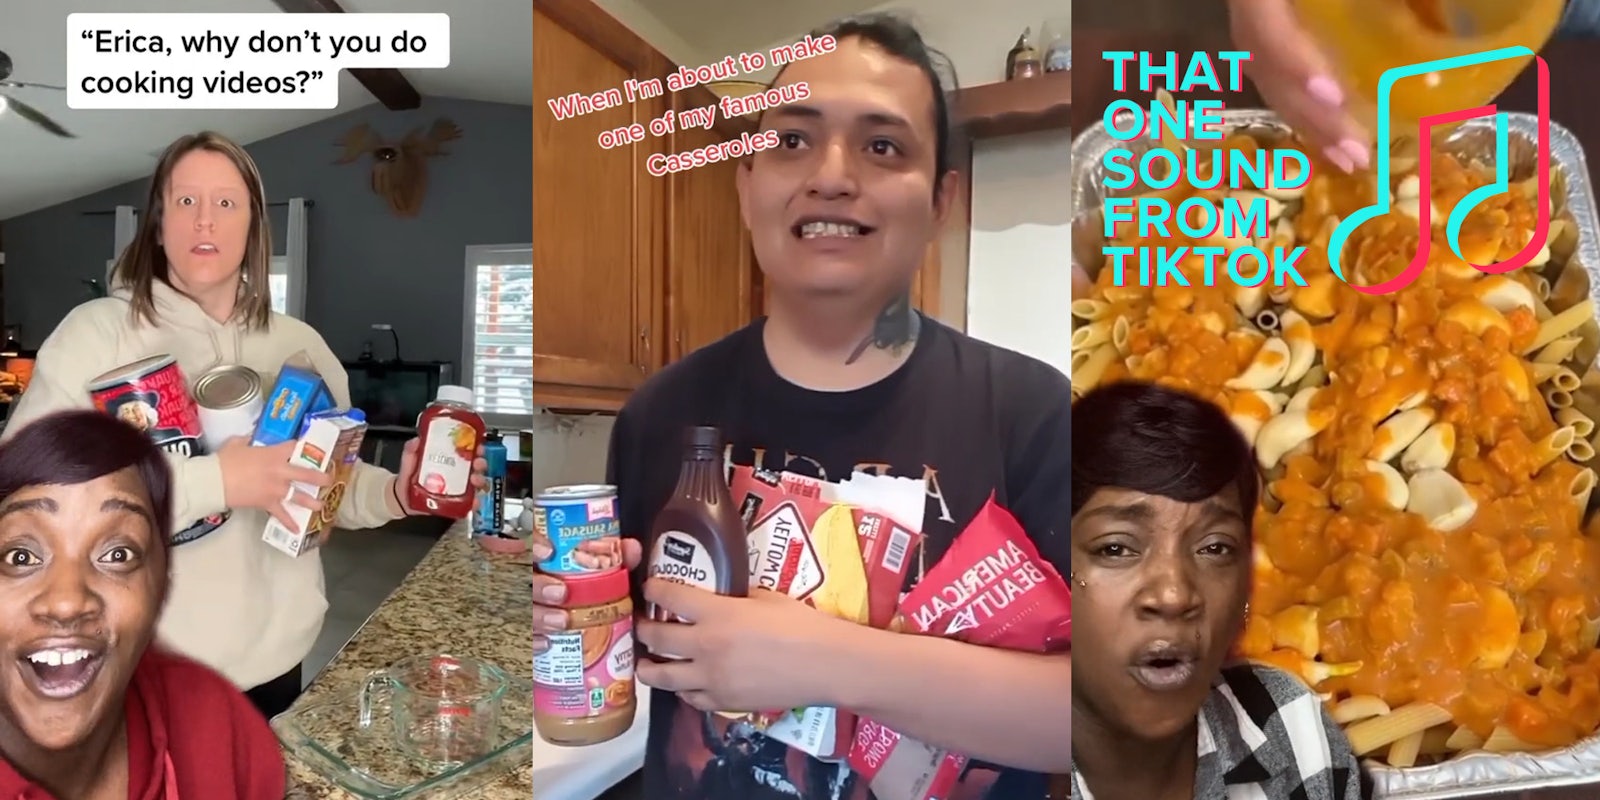 woman greenscreen TikTok over TikToker making food with caption ''Erica, why don't you do cooking videos?'' (l) person holding ingredients with caption 'When I'm about to make one of my famous casseroles' (c) woman greenscreen TikTok over food TikTok with That One Sound From TikTok logo in top right corner (r)